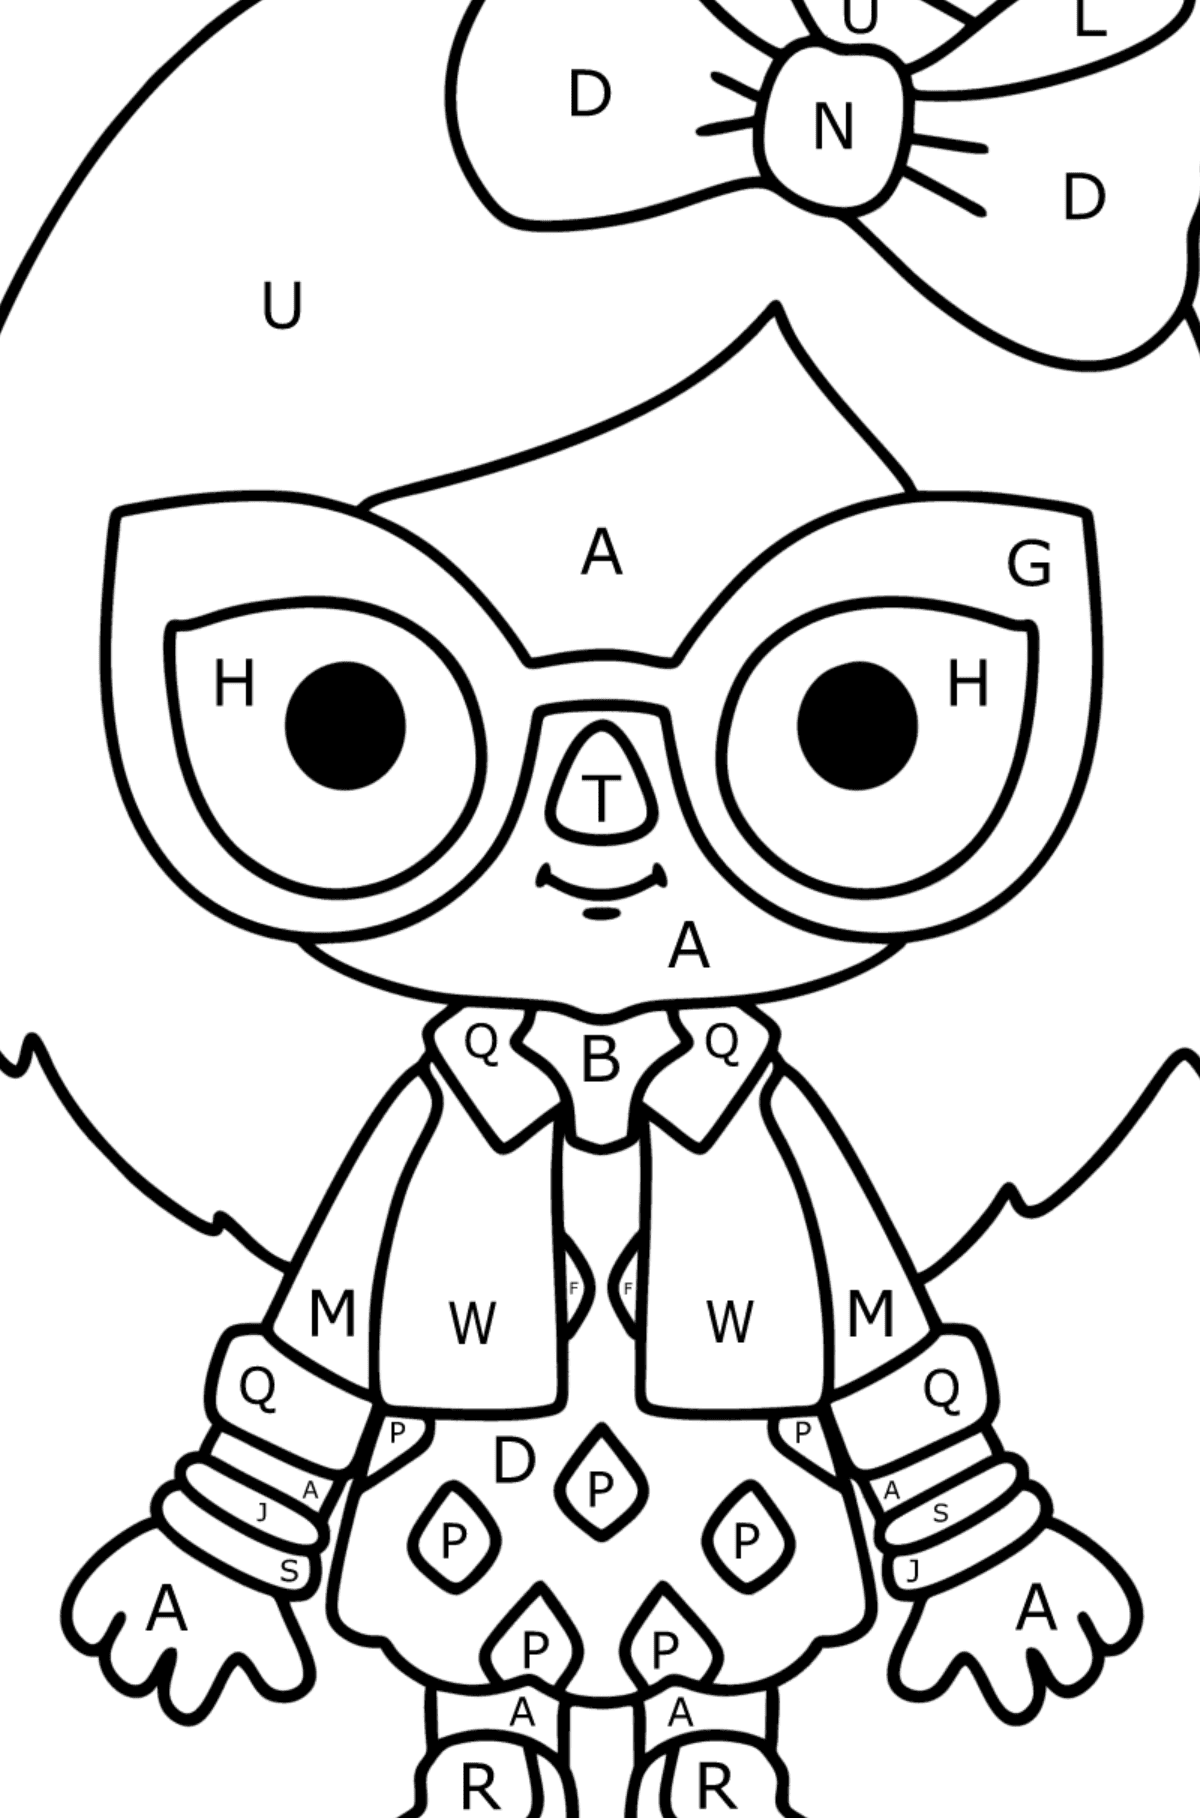 Colouring page Girl tocaboca 01 - Coloring by Letters for Kids